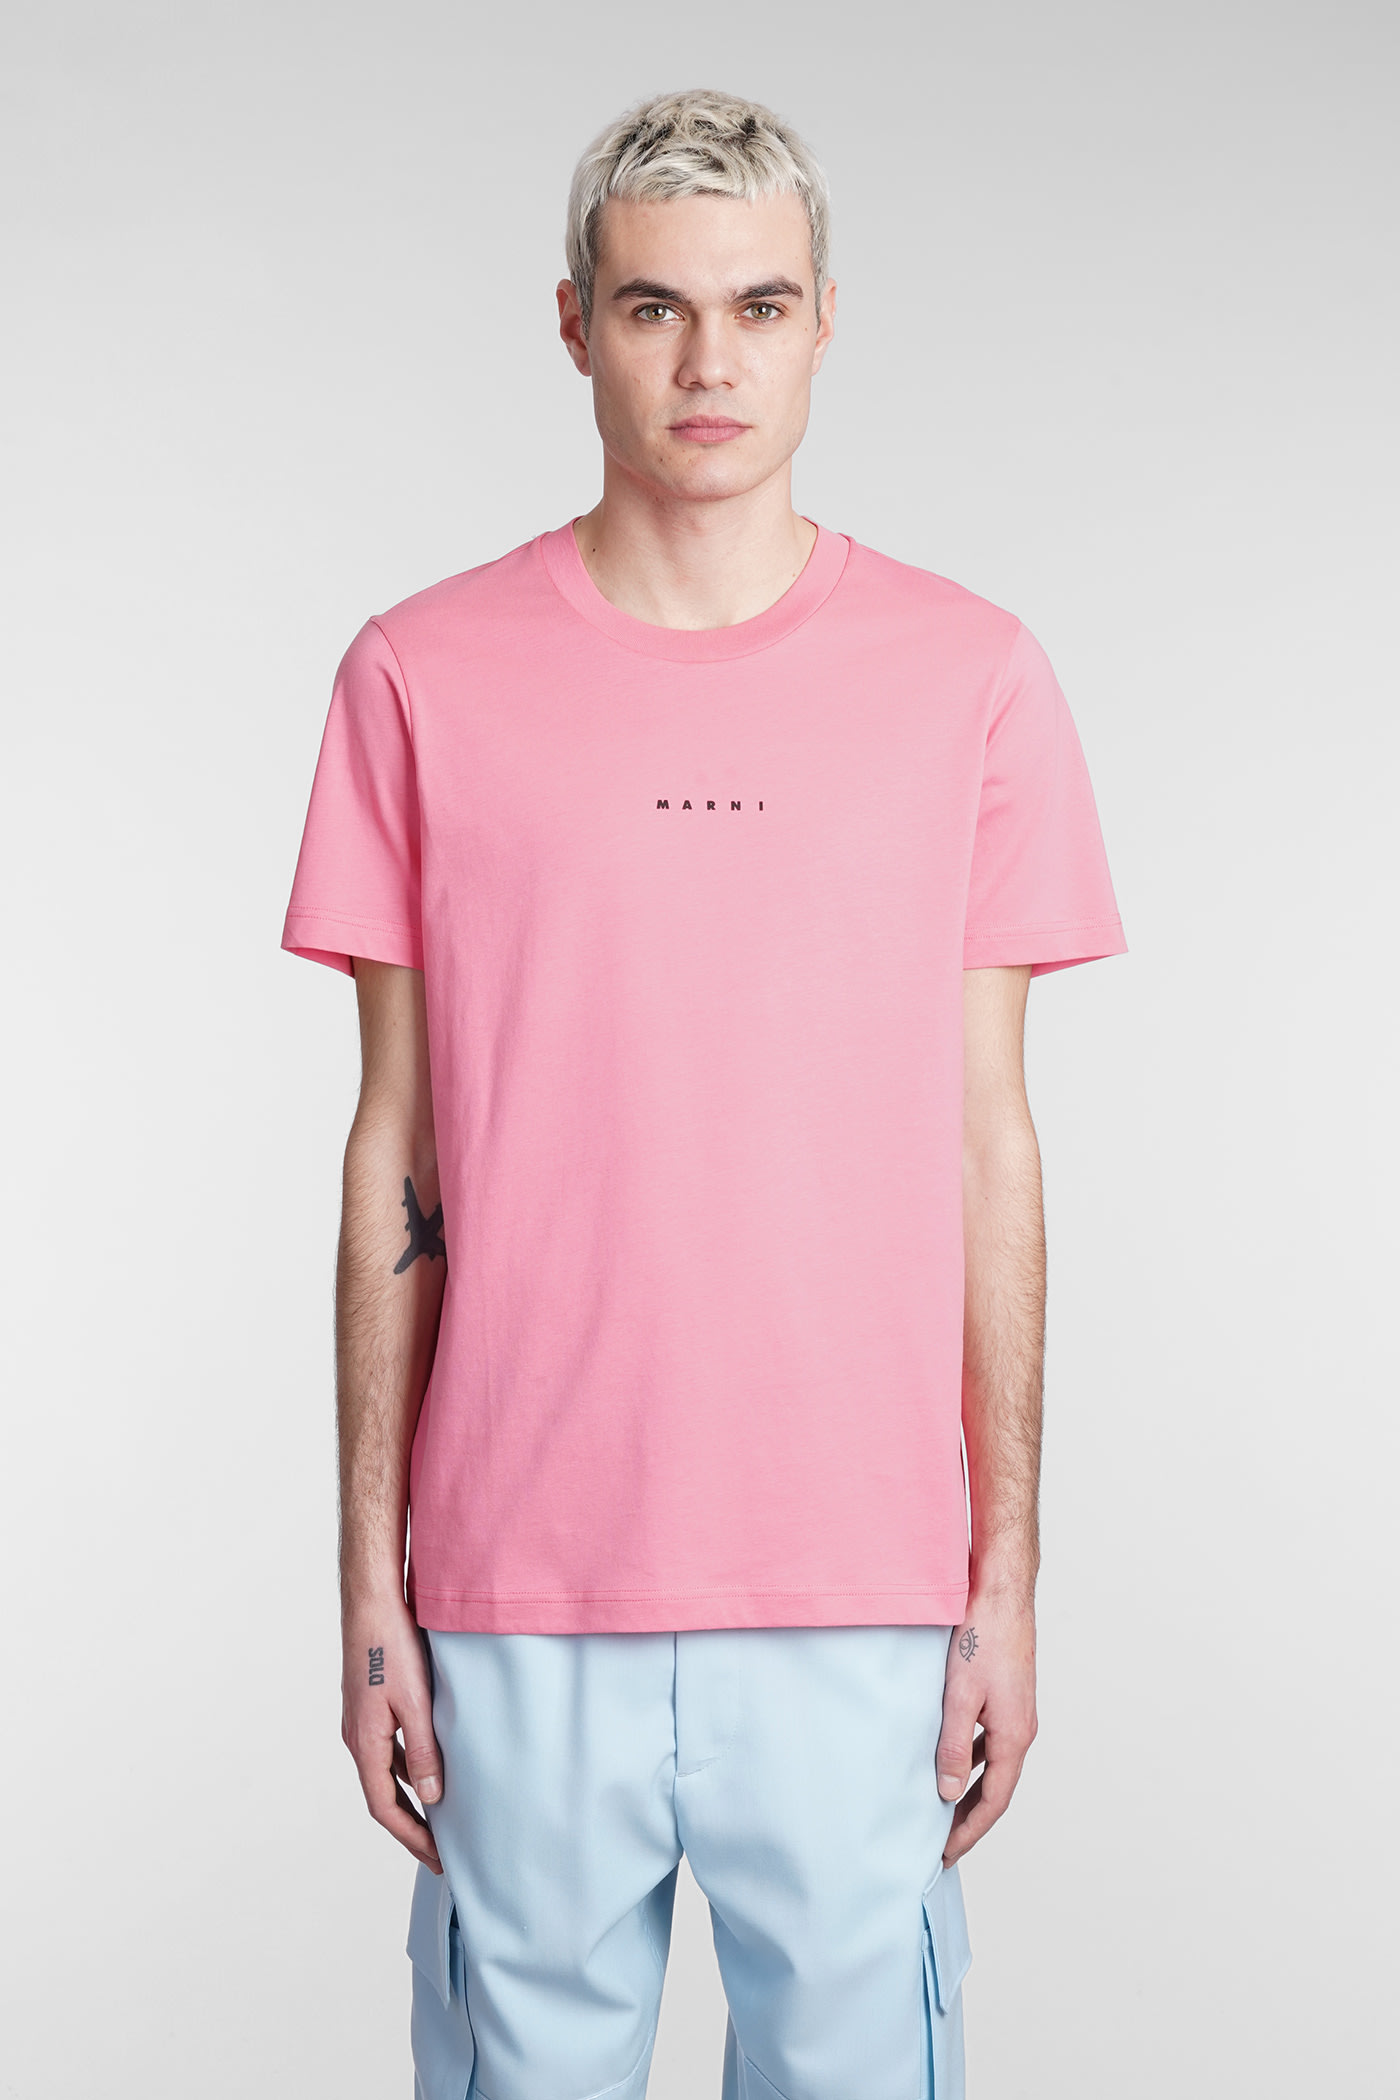 Marni T-shirt In Rose-pink Cotton